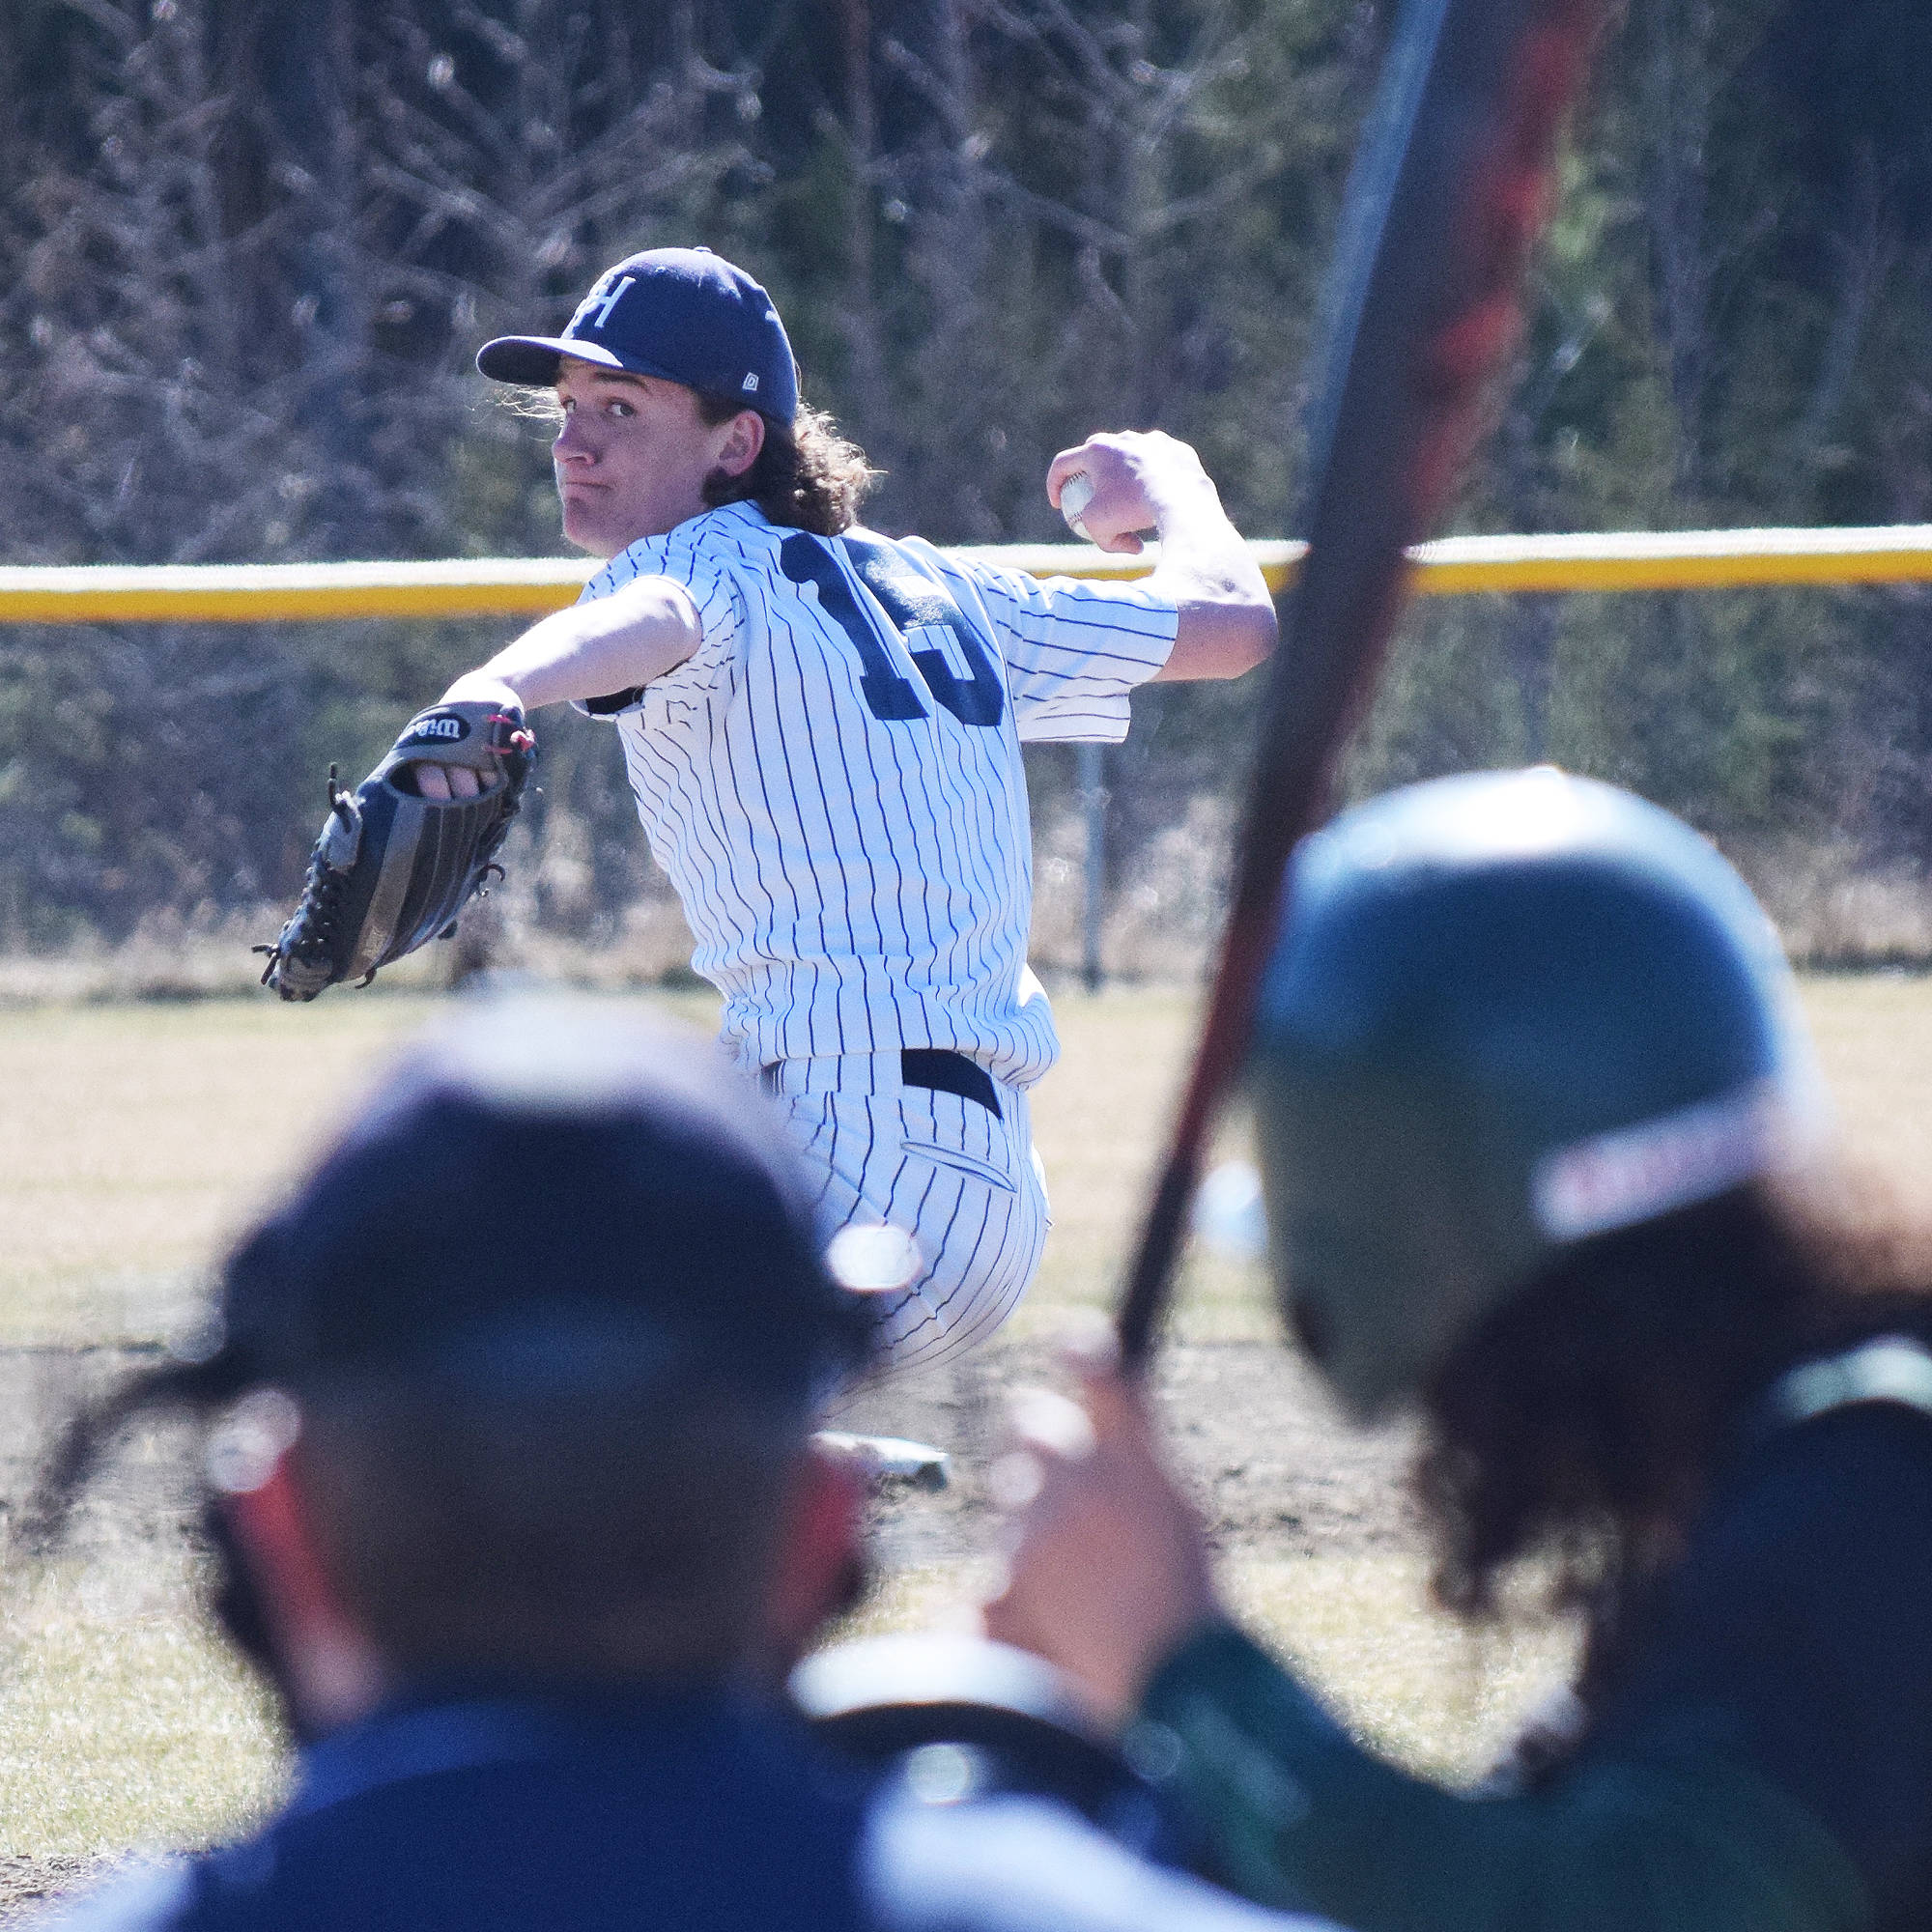 Soldotna pitcher Matthew Daugherty winds up for the throw against a Colony batter, May 9 at the Soldotna baseball fields. (Photo by Joey Klecka/Peninsula Clarion)